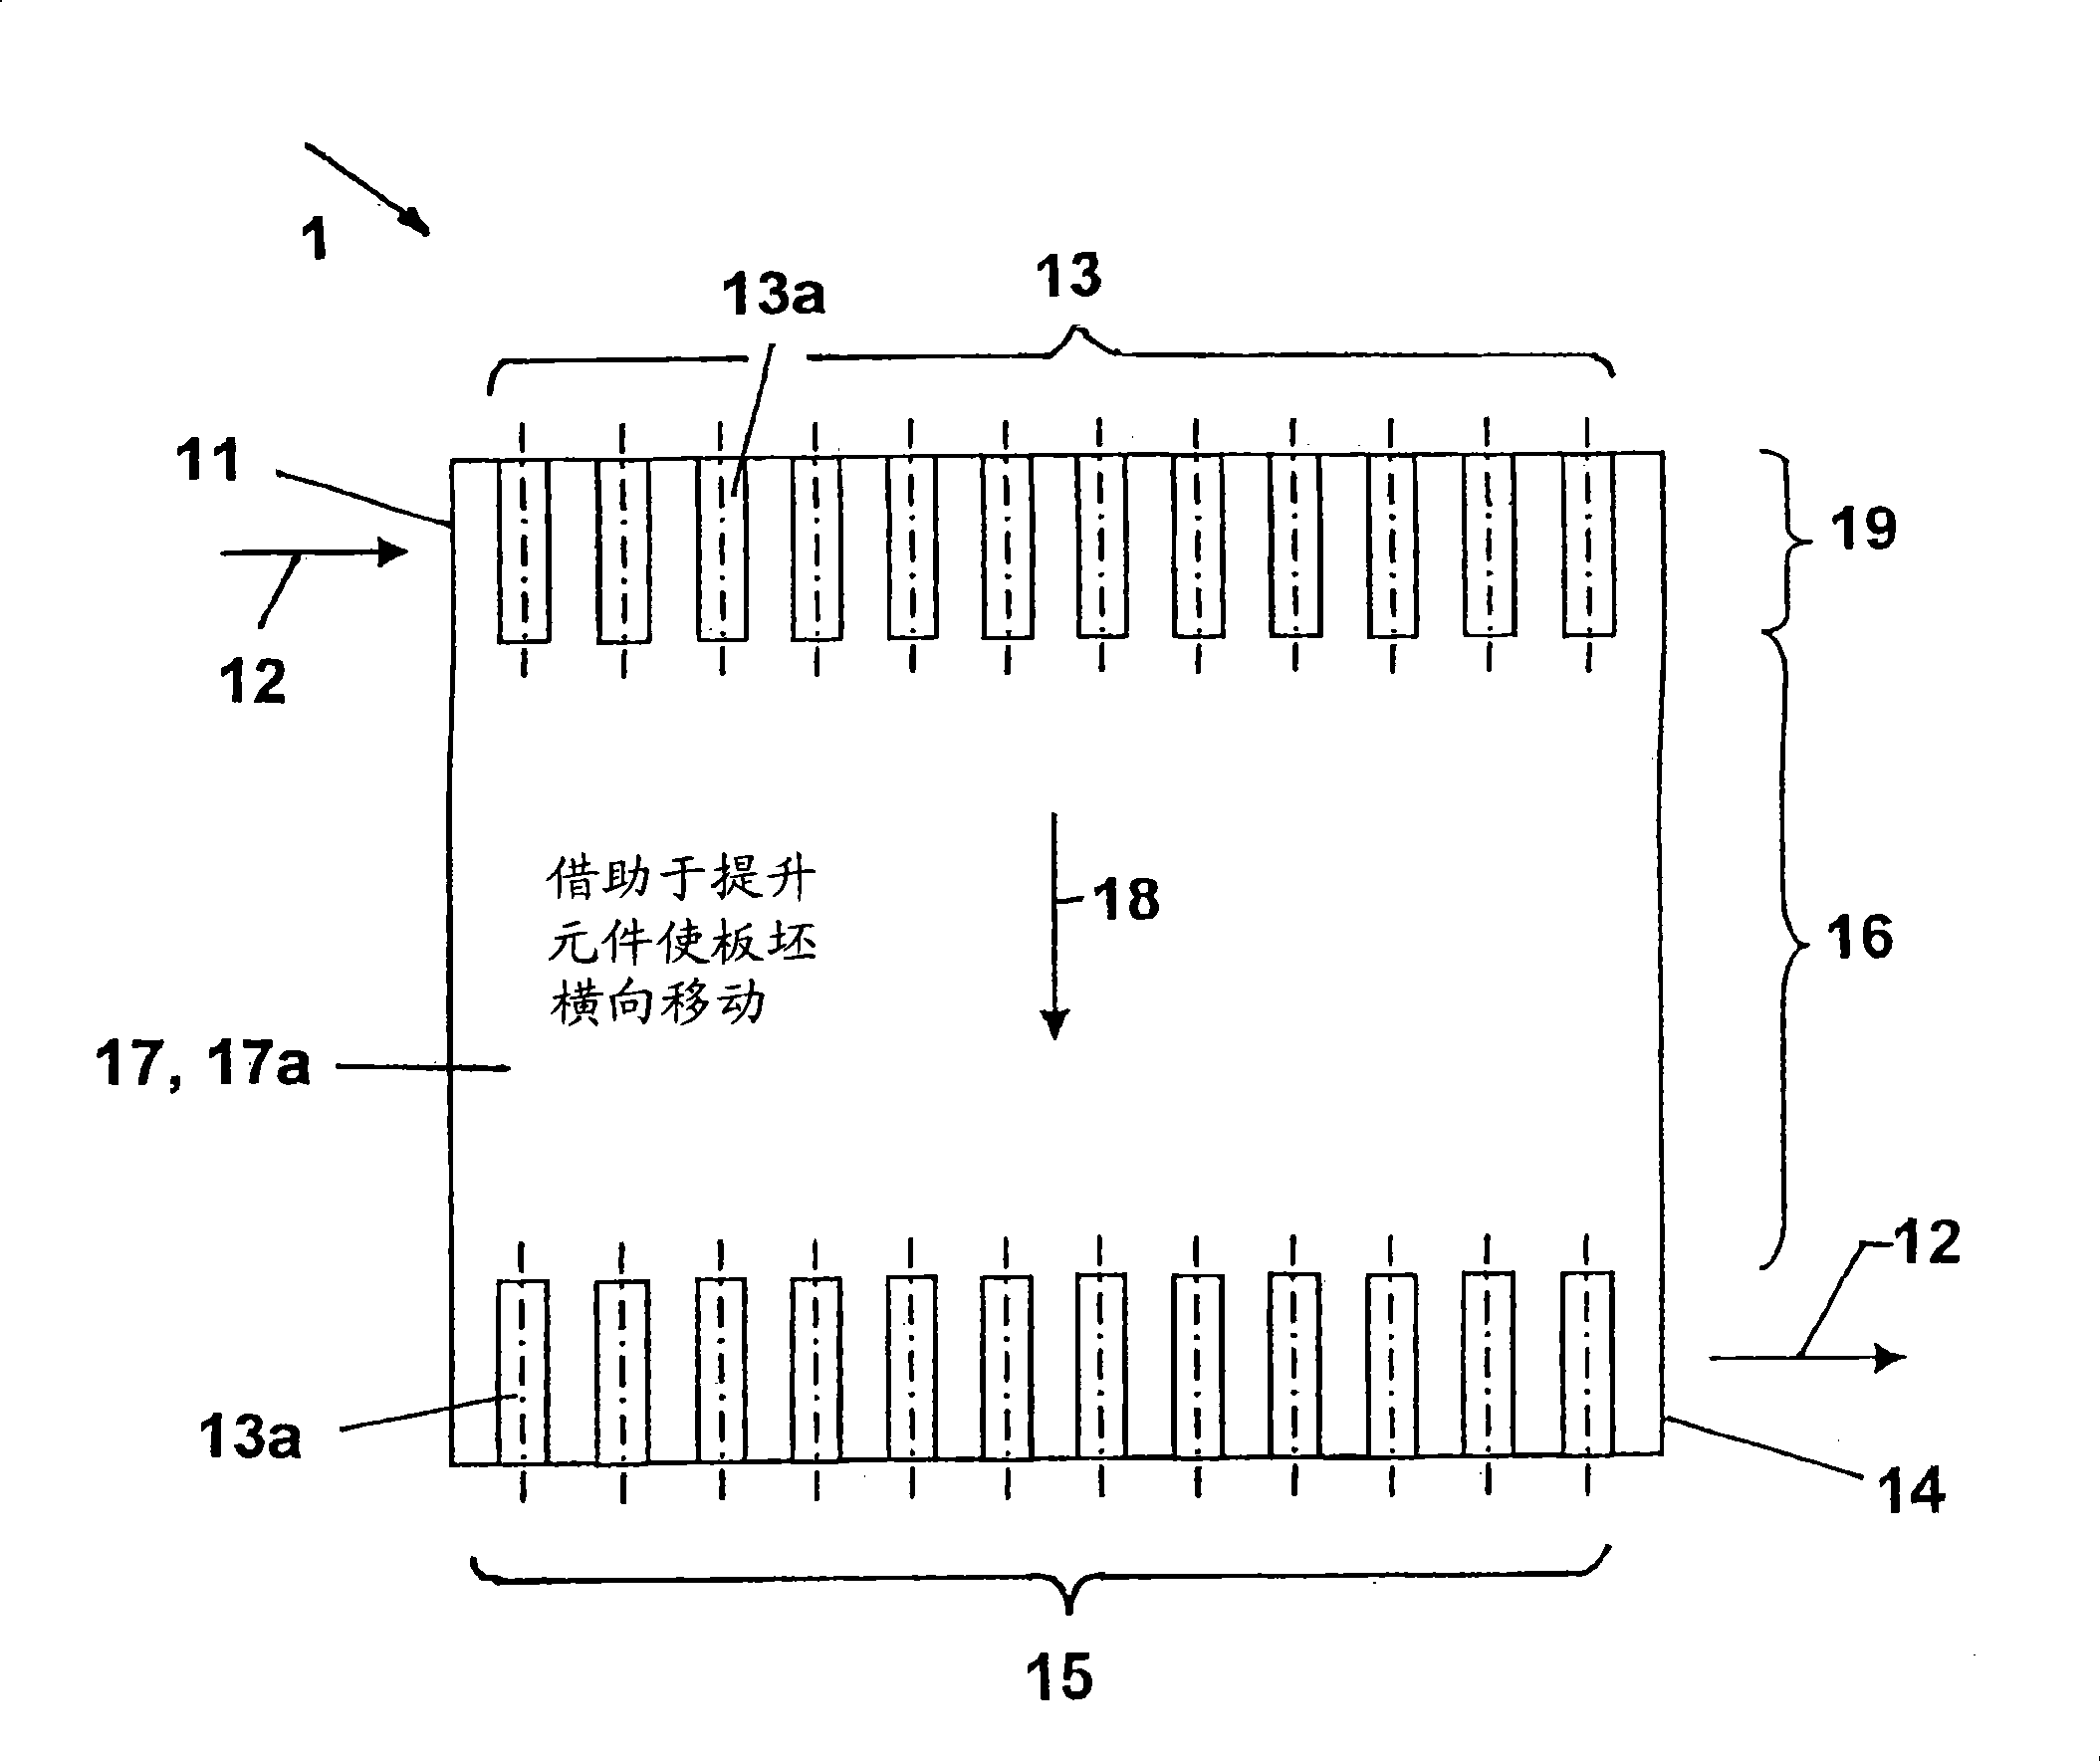 Roller hearth furnace for heating and/or temperature equalisation of steel or steel alloy continuous cast products and arrangement thereof before a hot strip final rolling mill